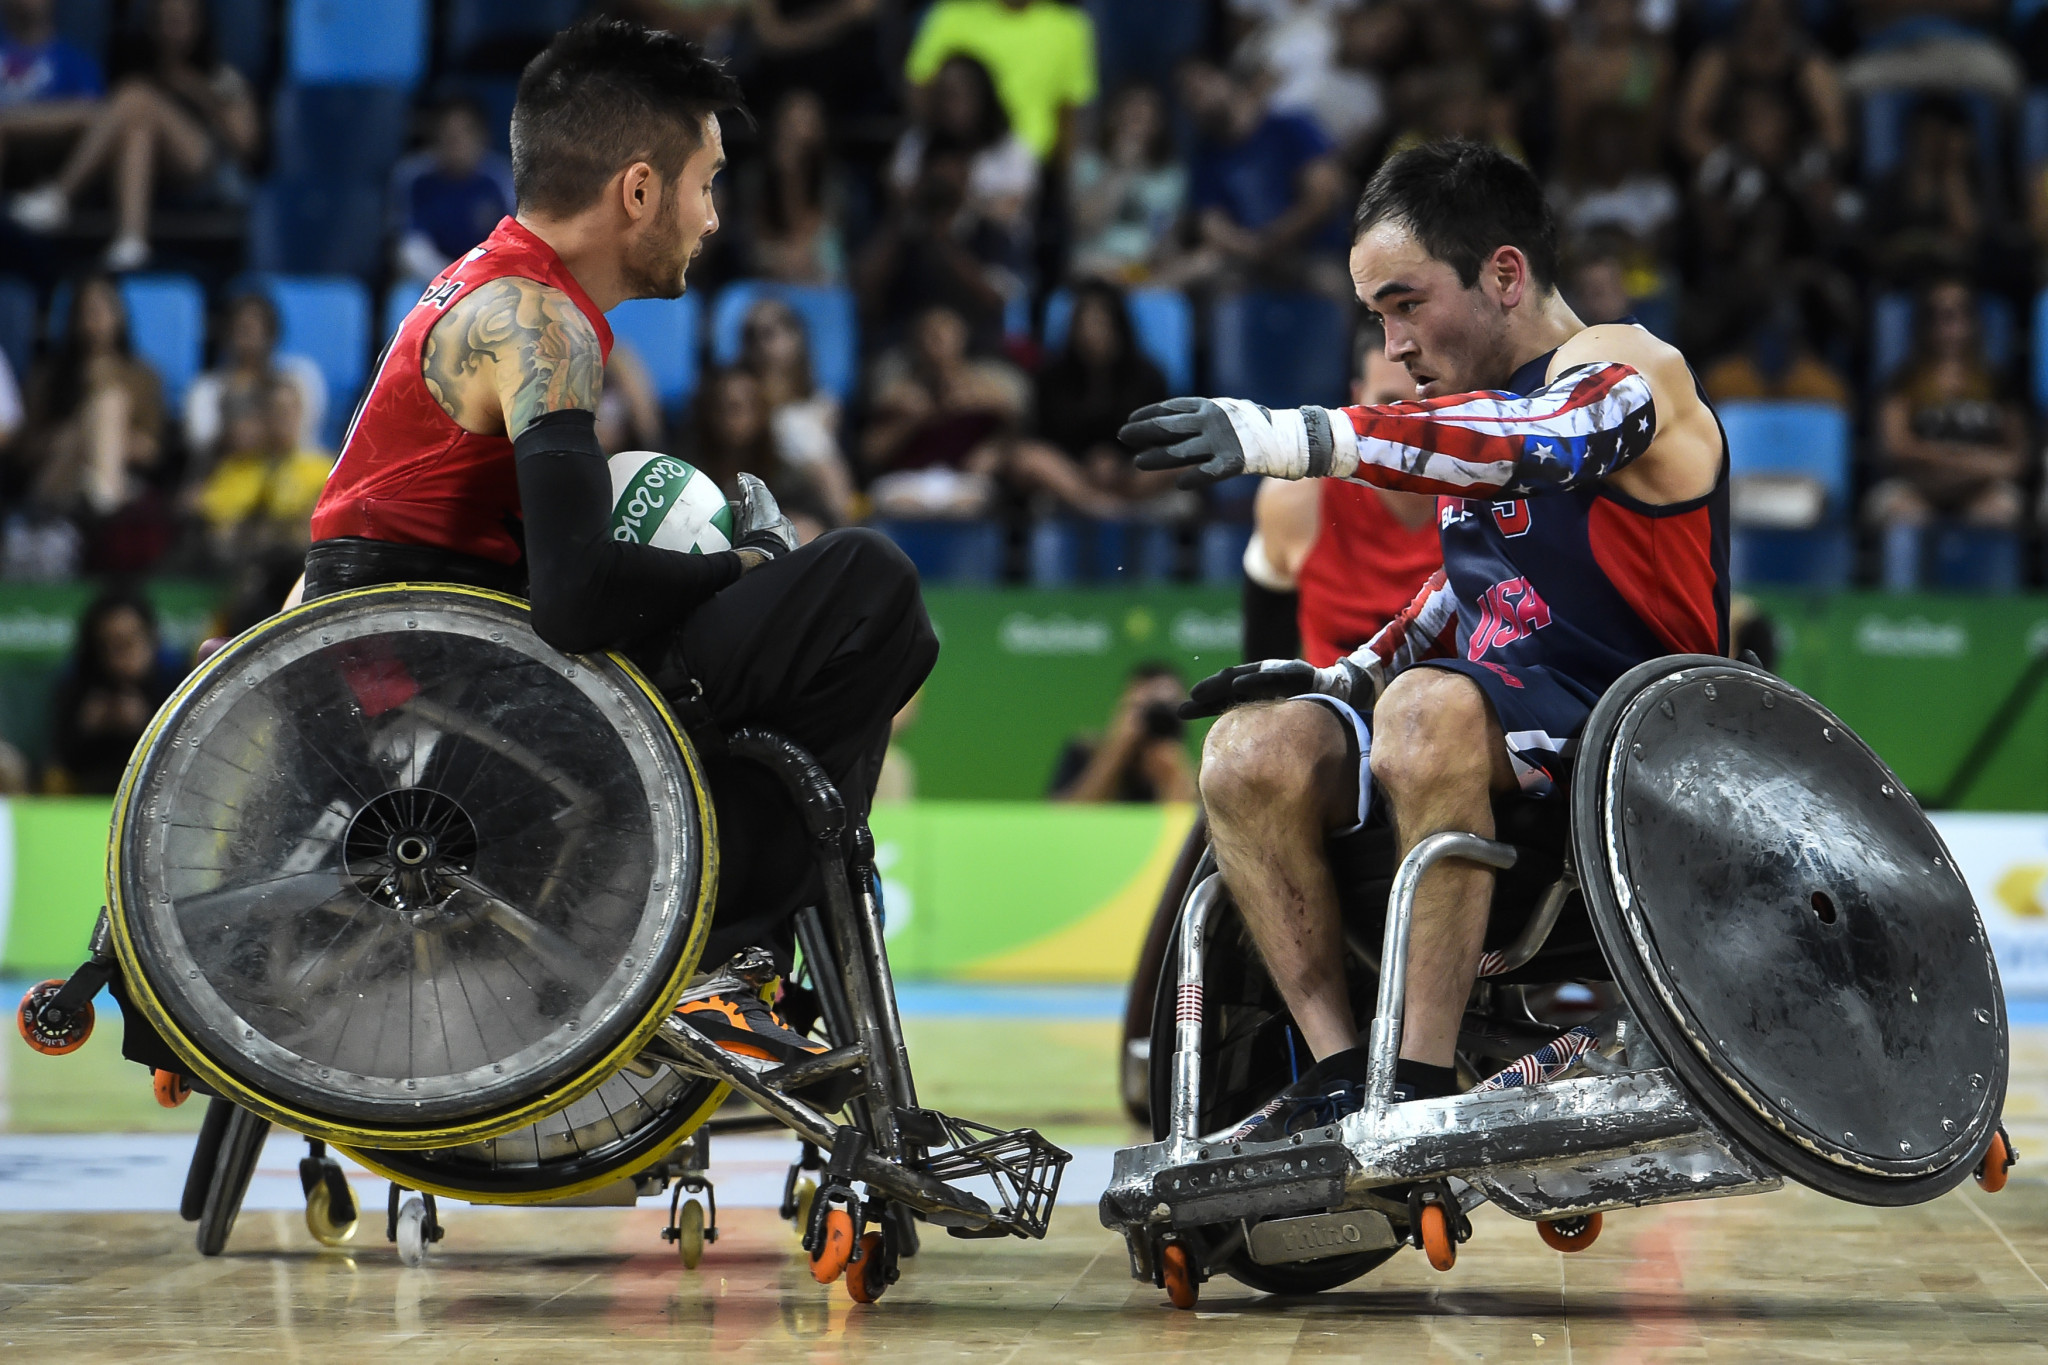 Dr. Kenneth Lee is no stranger to wheelchair rugby having worked with the IWRF since 2004 ©Getty Images